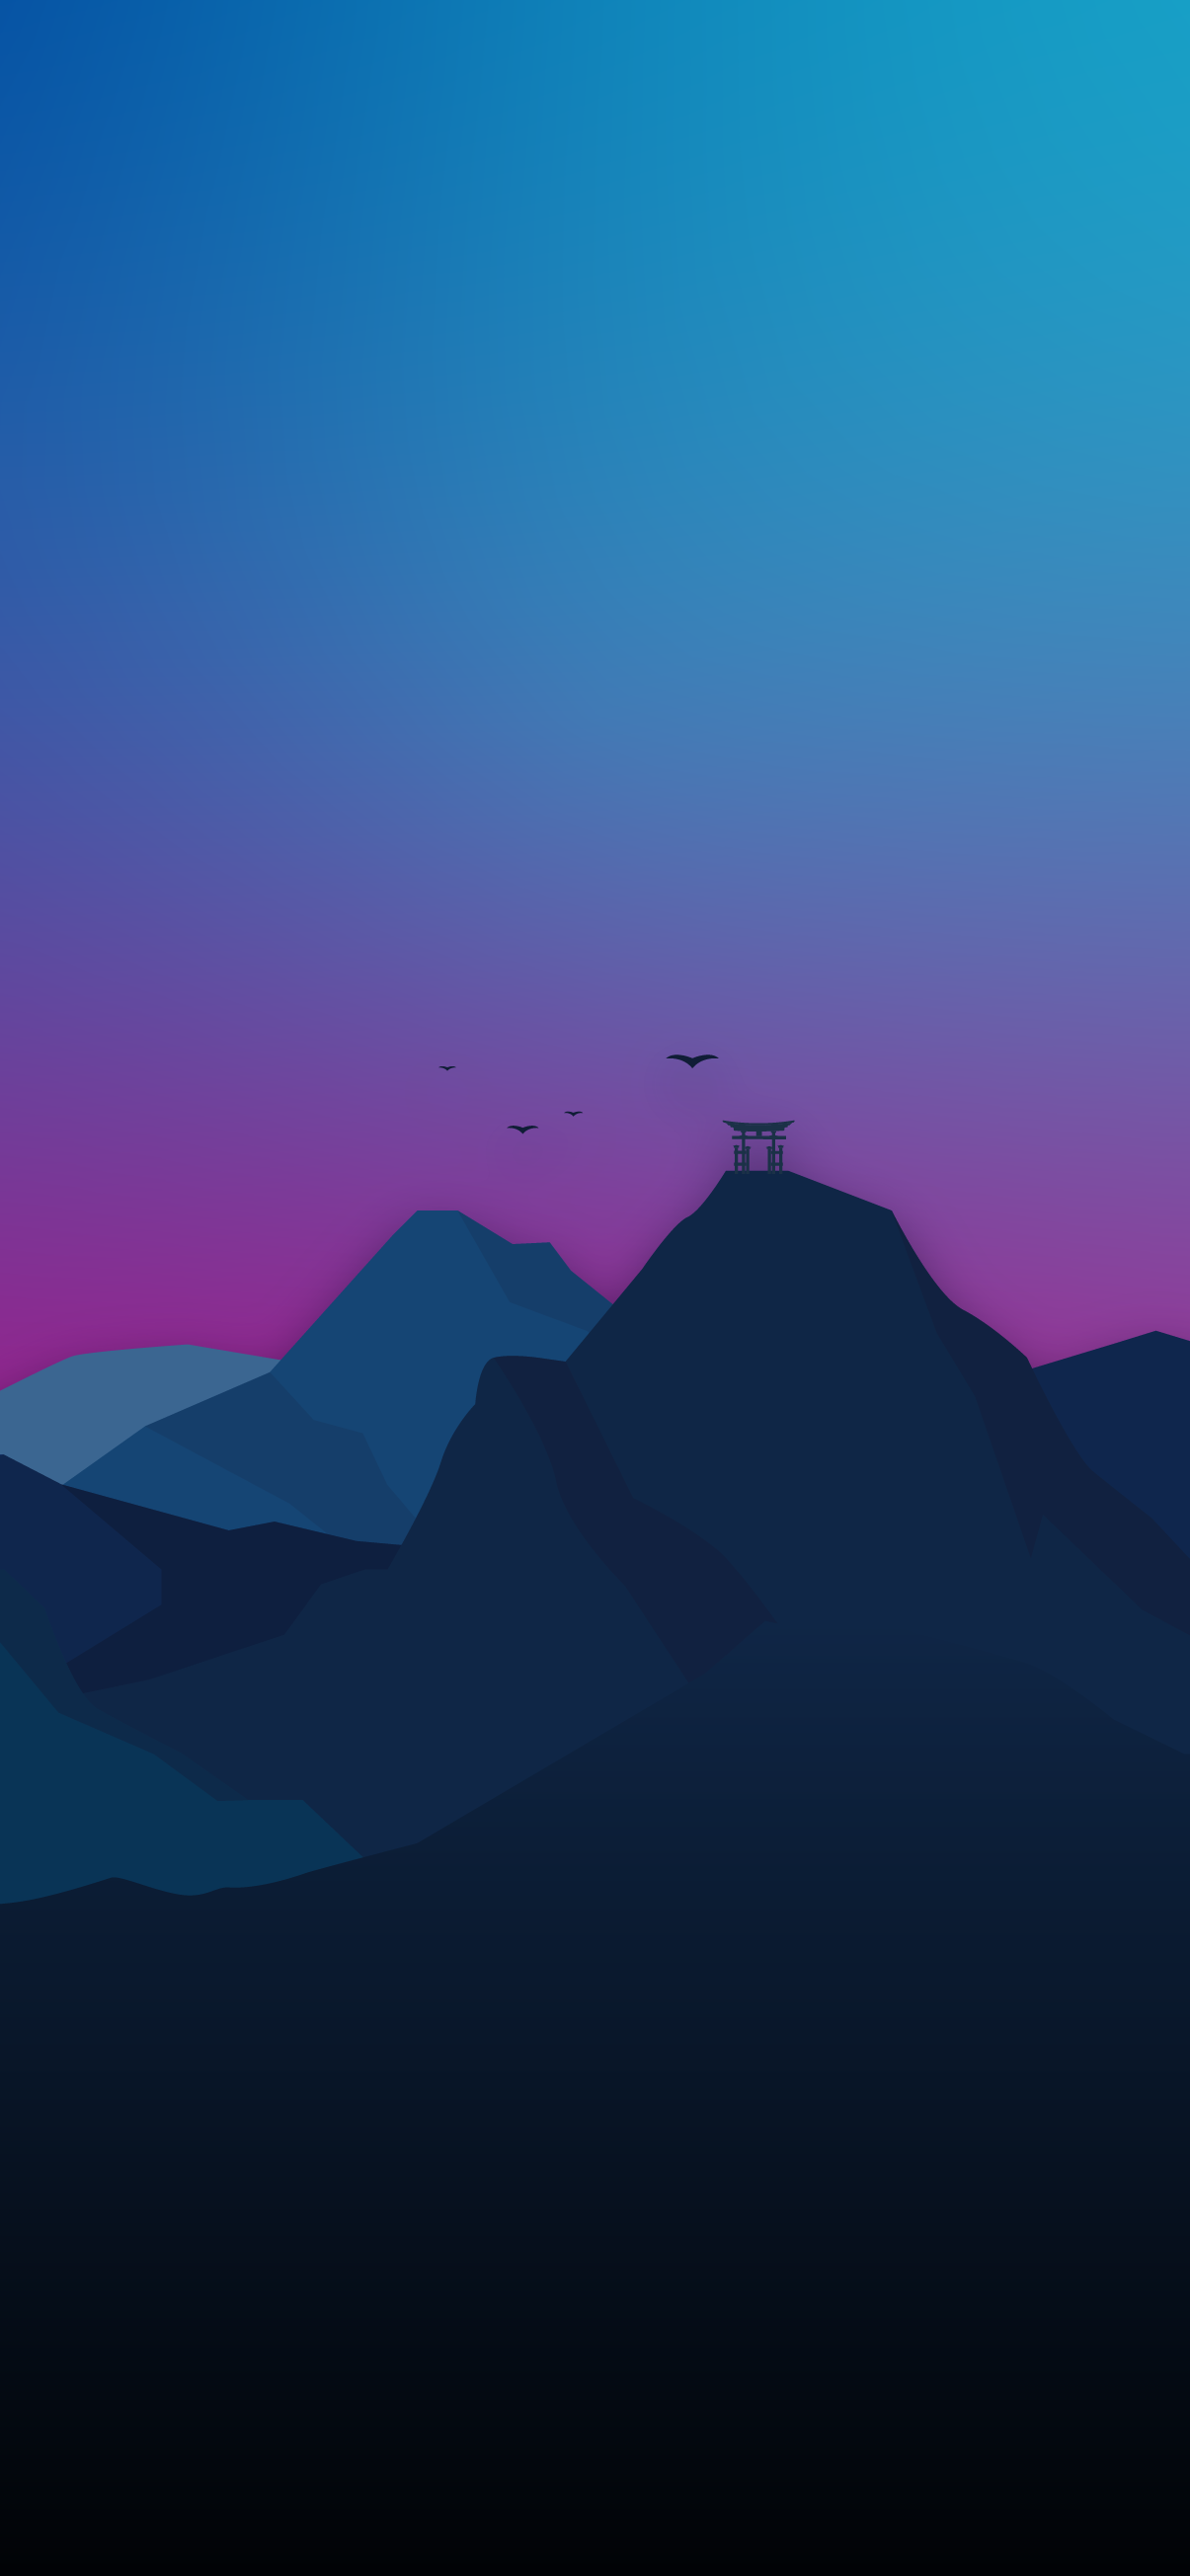 20 Best Minimalist Wallpapers for iPhone and Android (FREE)